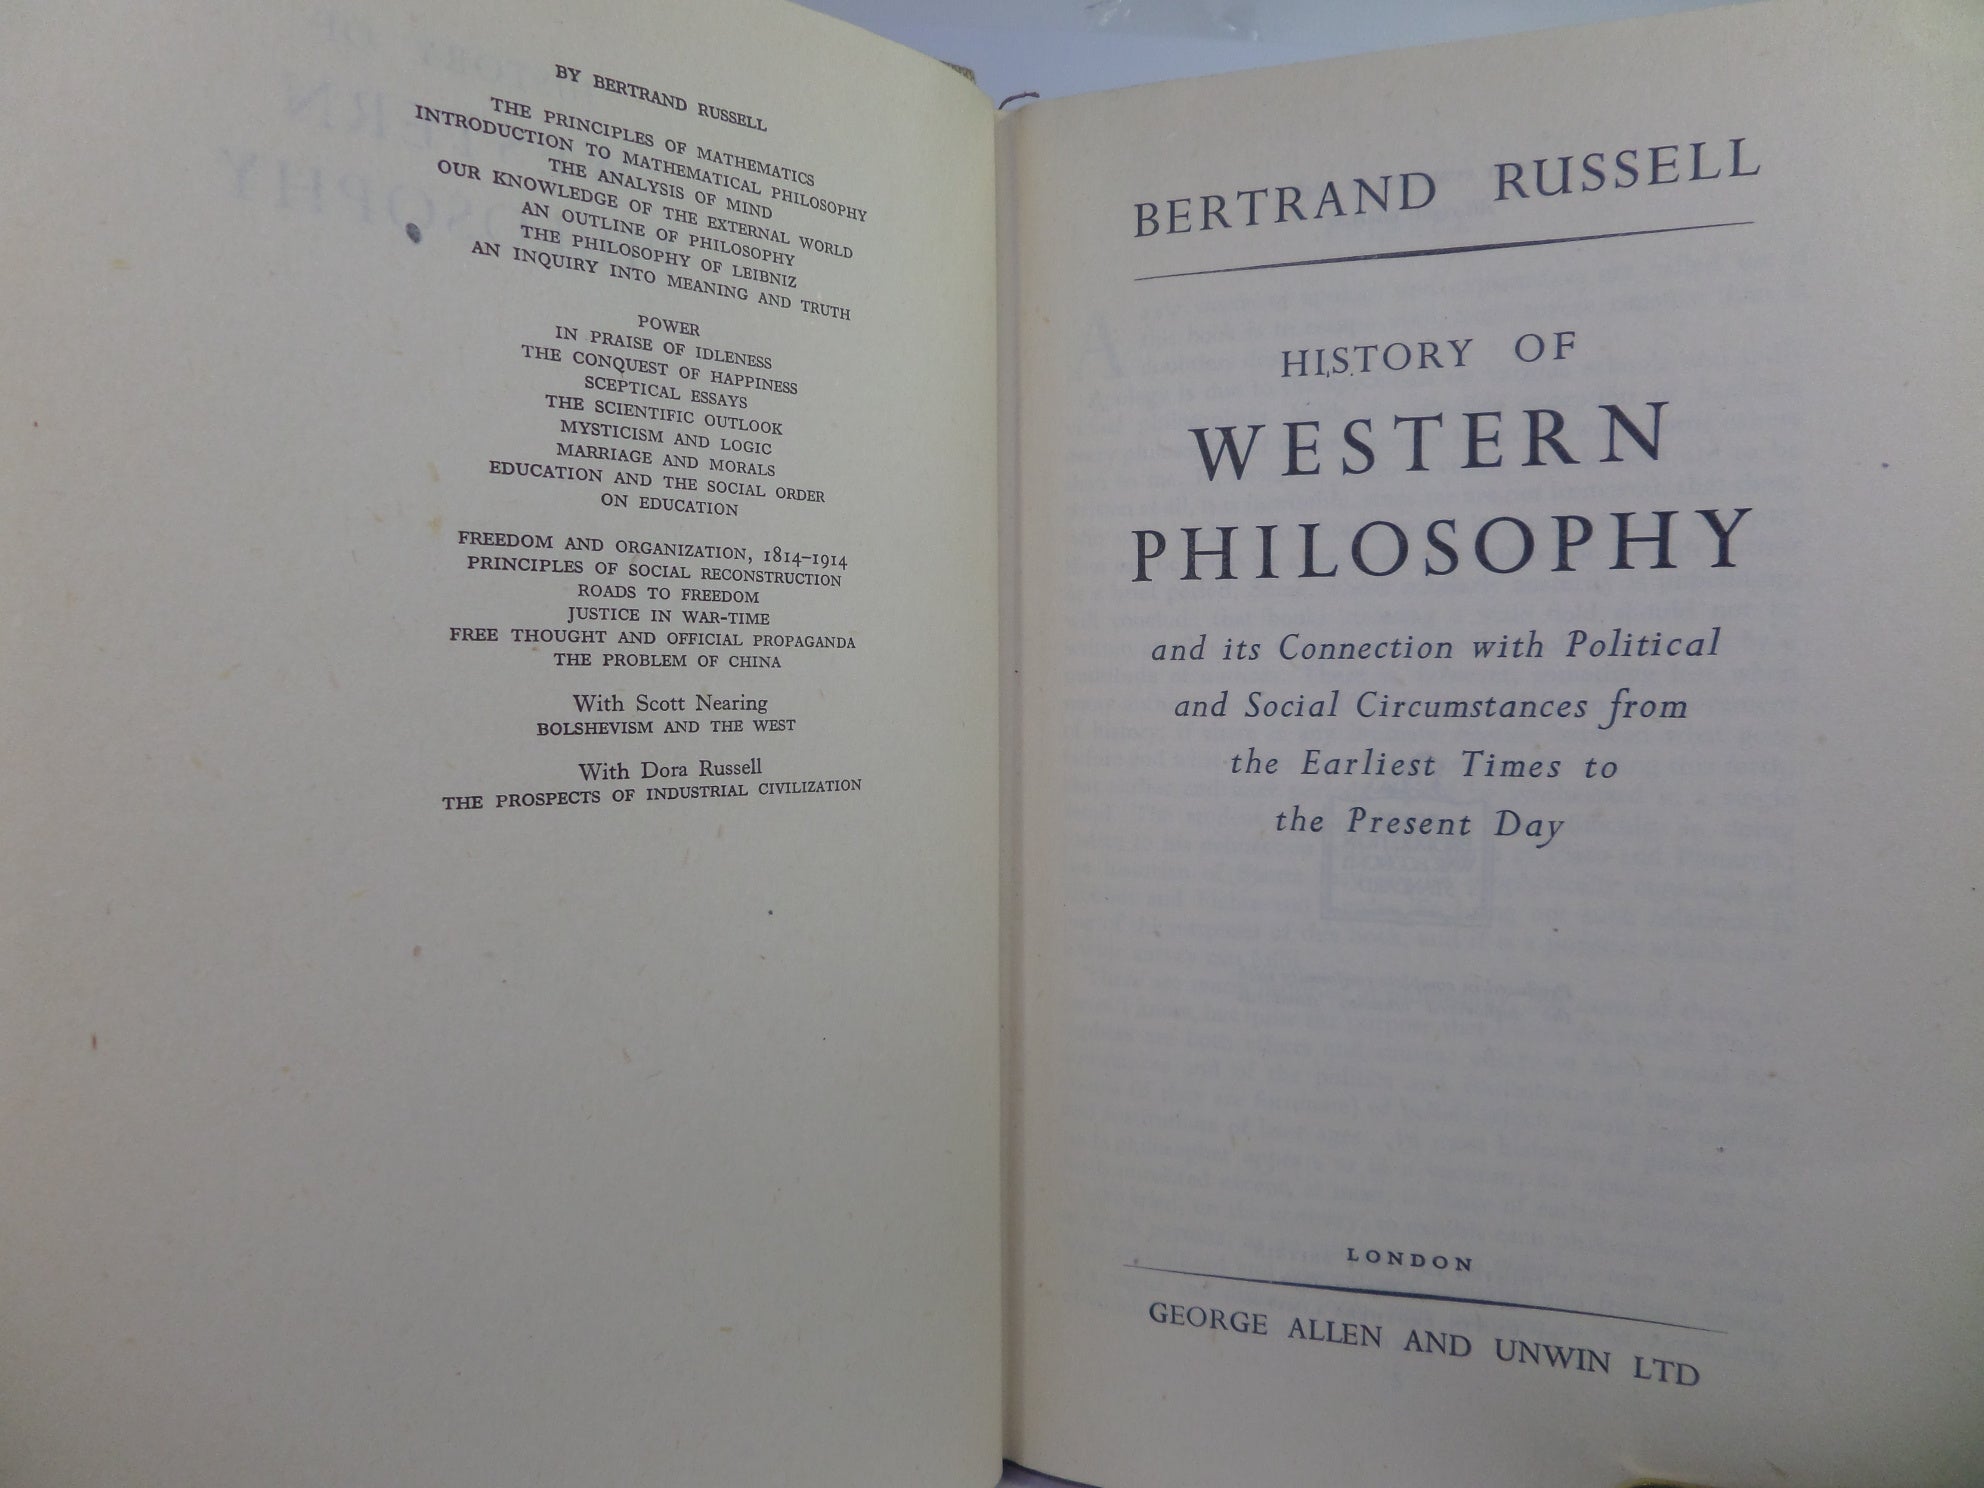 HISTORY OF WESTERN PHILOSOPHY BY BERTRAND RUSSELL 1946 FIRST EDITION